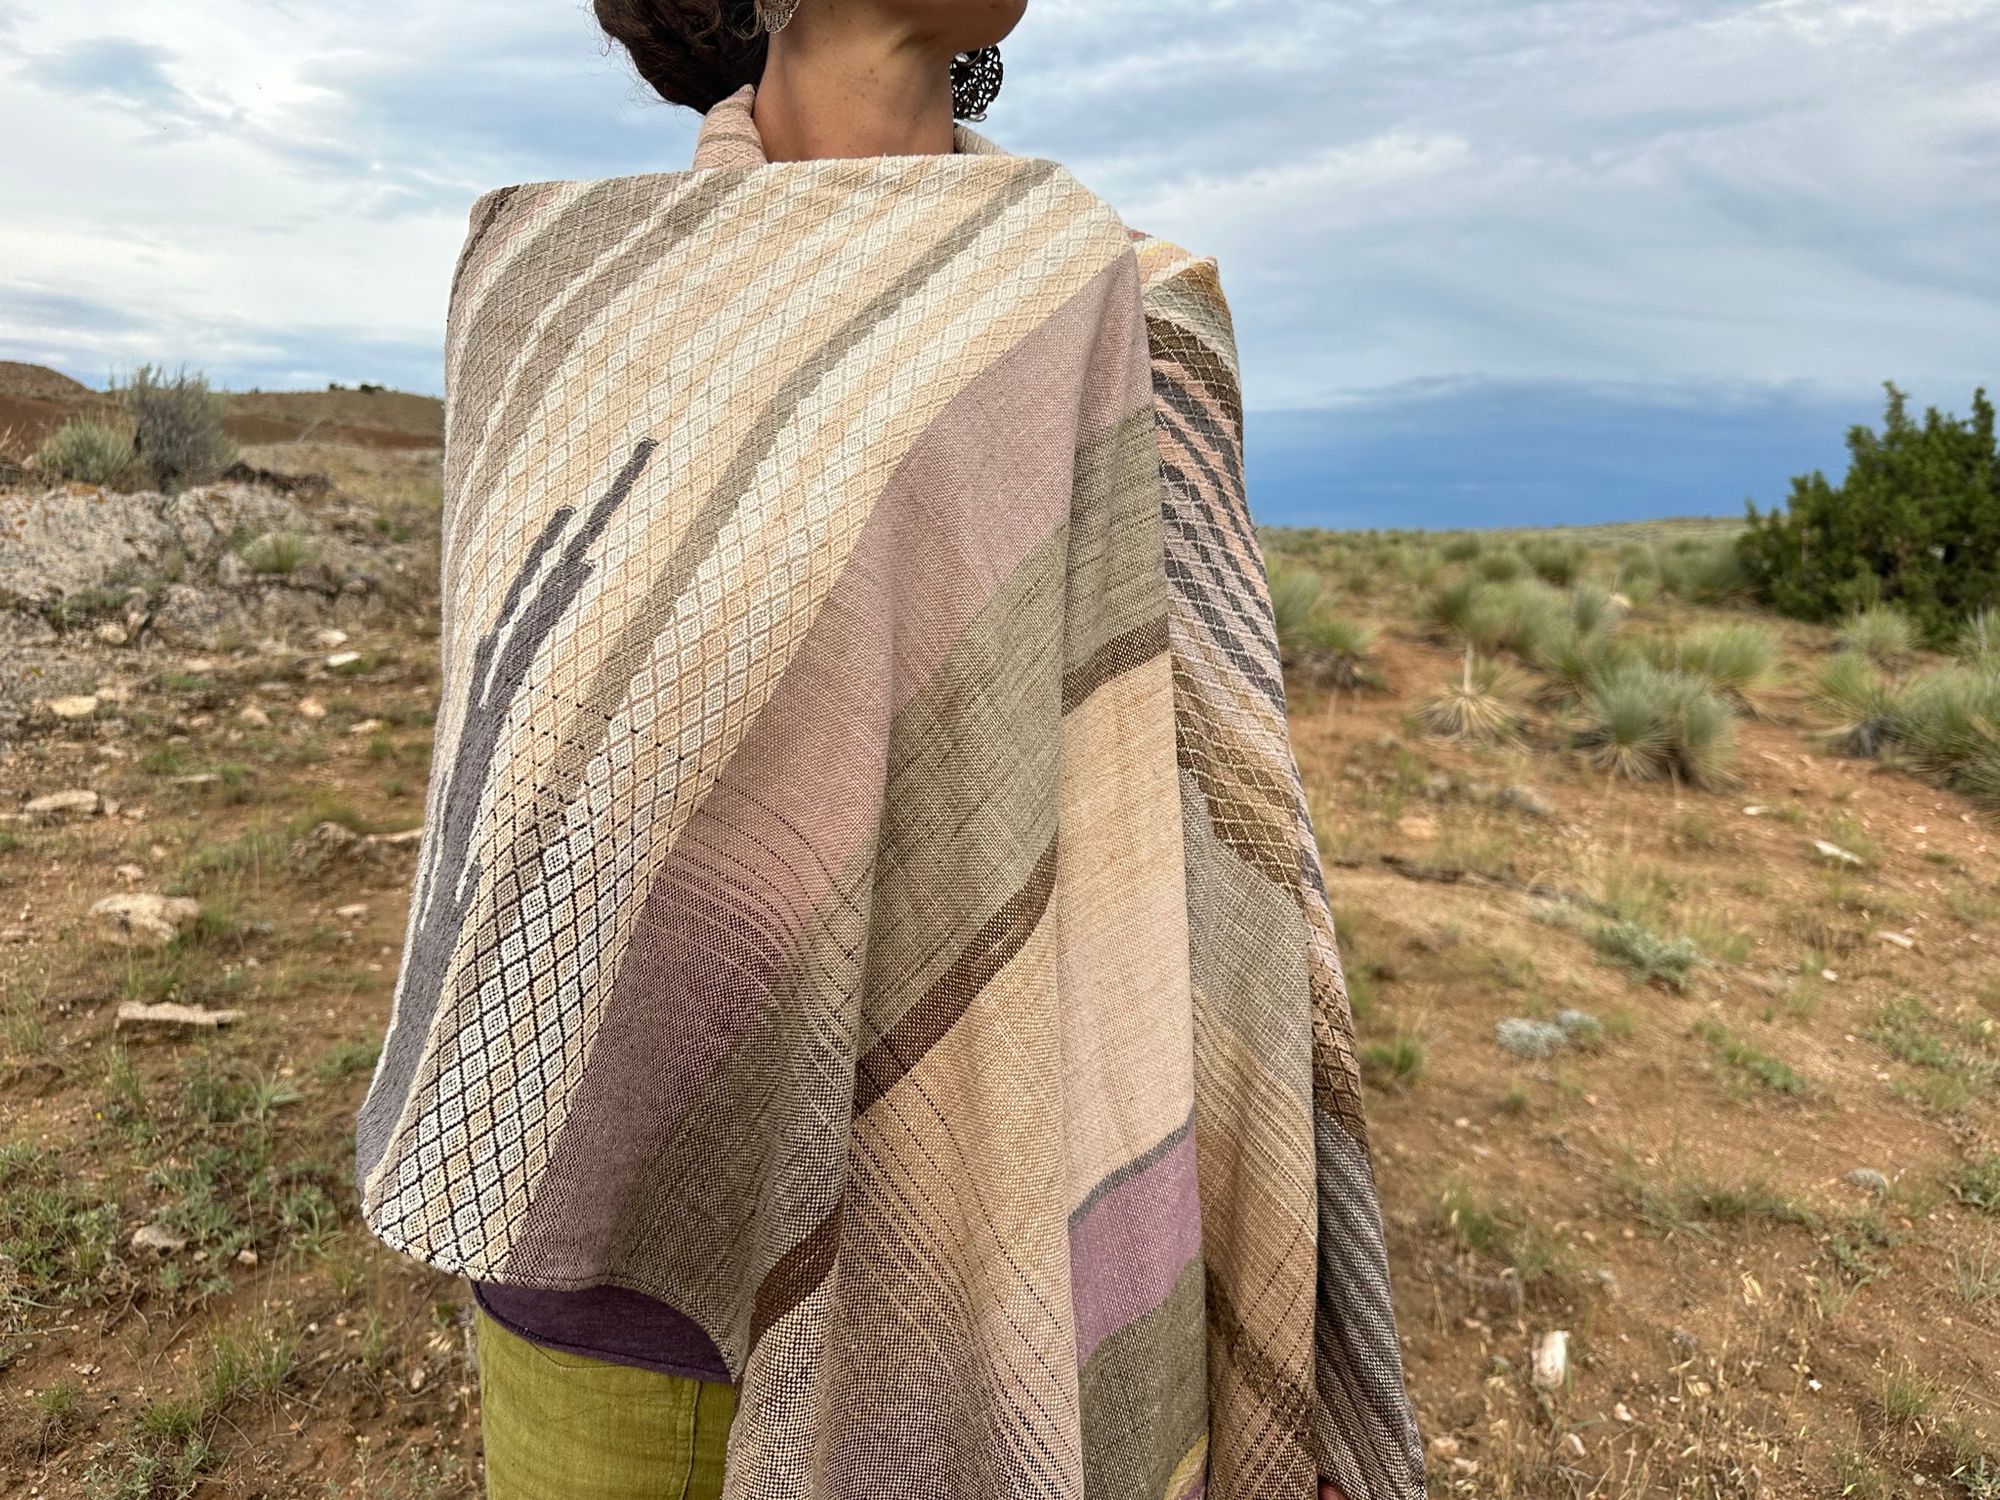 a woman wears a shawl of handwoven fabric of Naturally dyed subtle rainbow hues with a diamond texture pattern in a mountain landscape